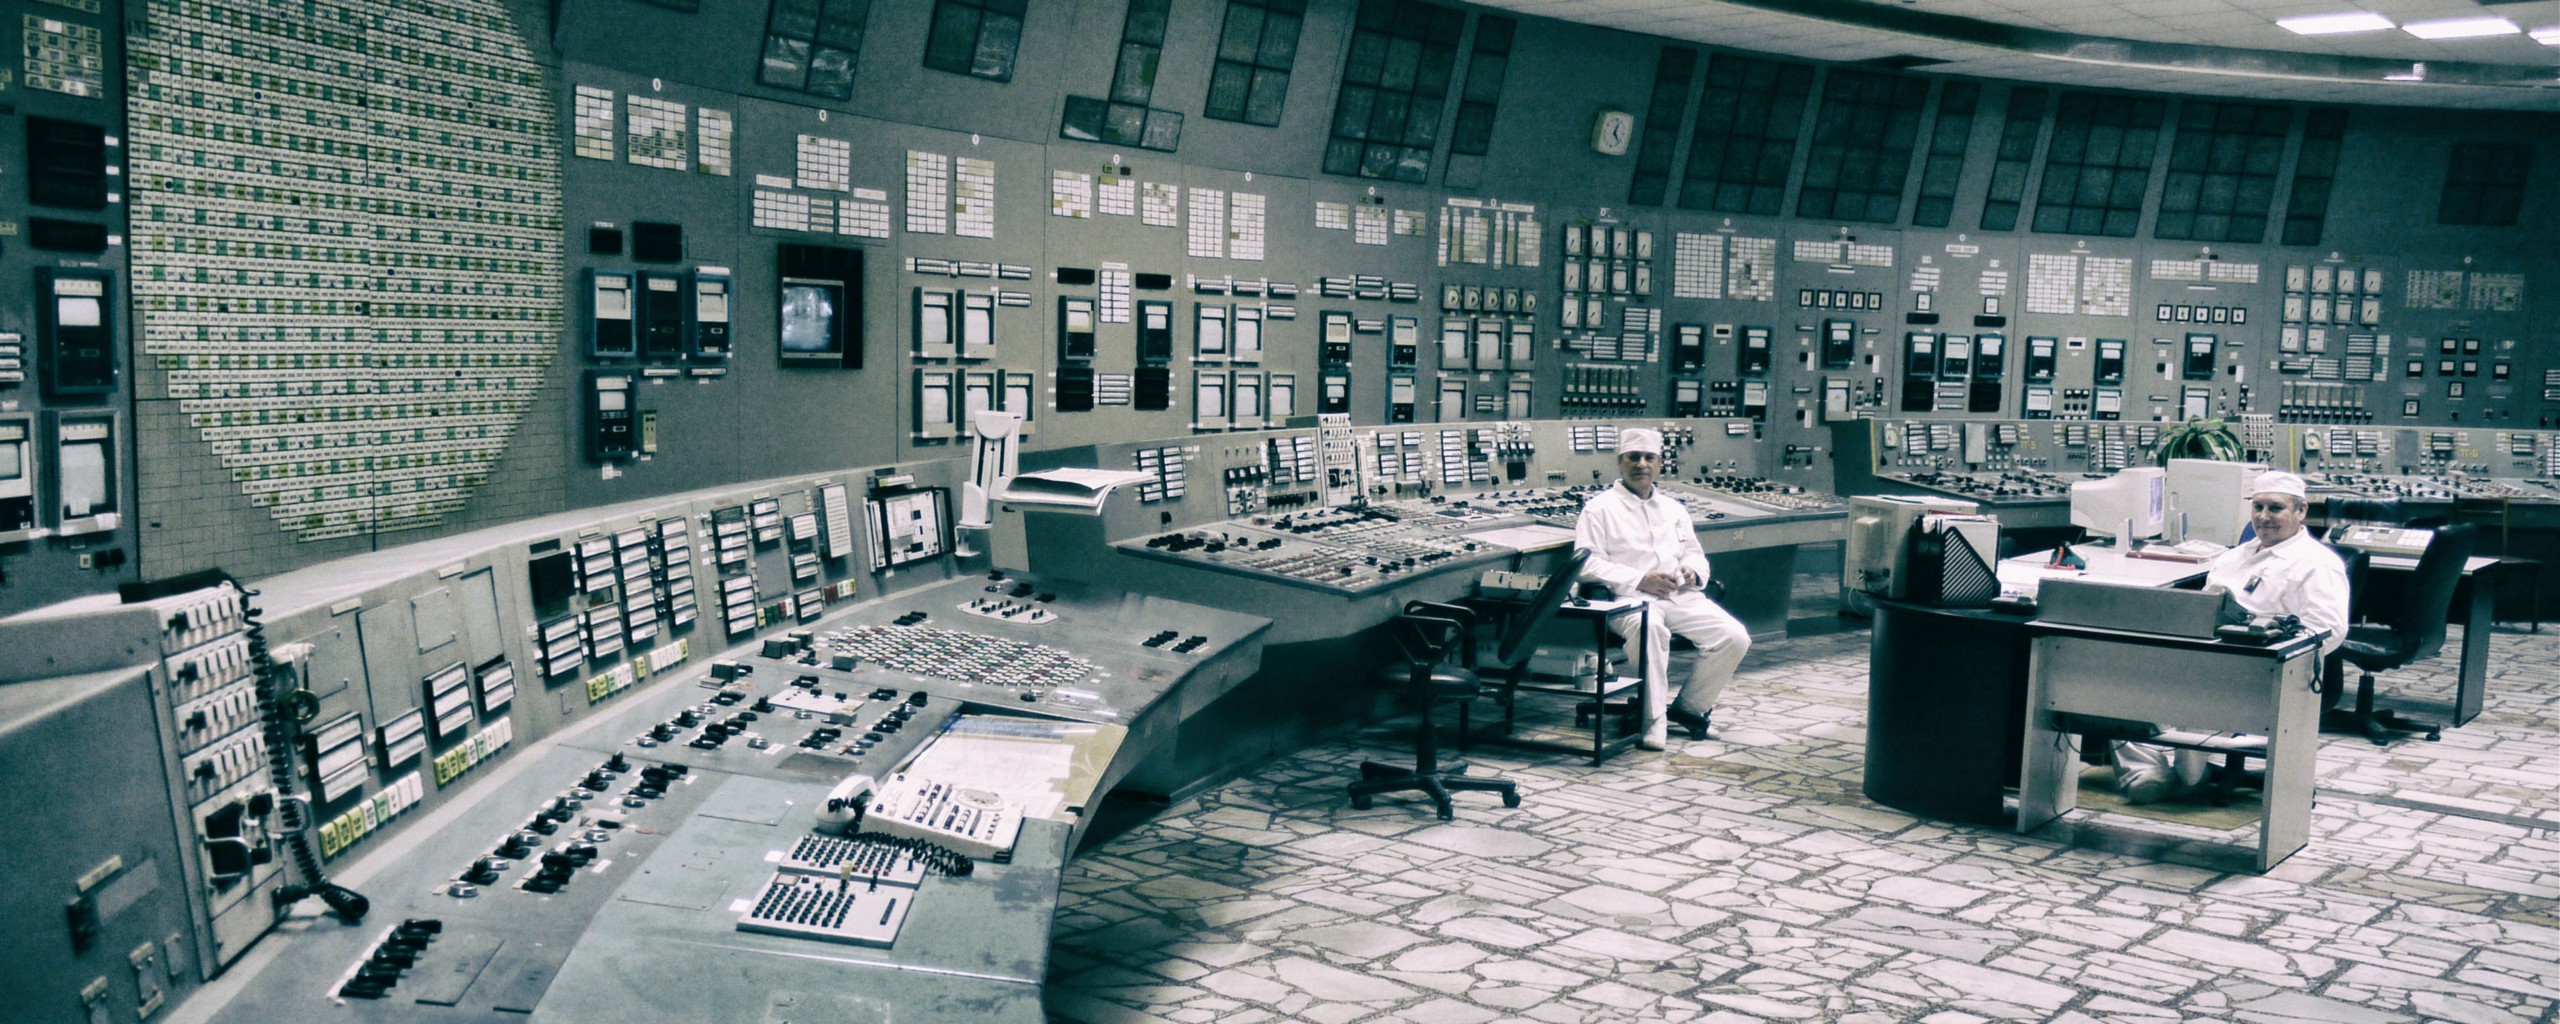 Two men in white suits and caps sit in a large room with a huge control panel displaying innumerable switches, buttons, displays, and lights.